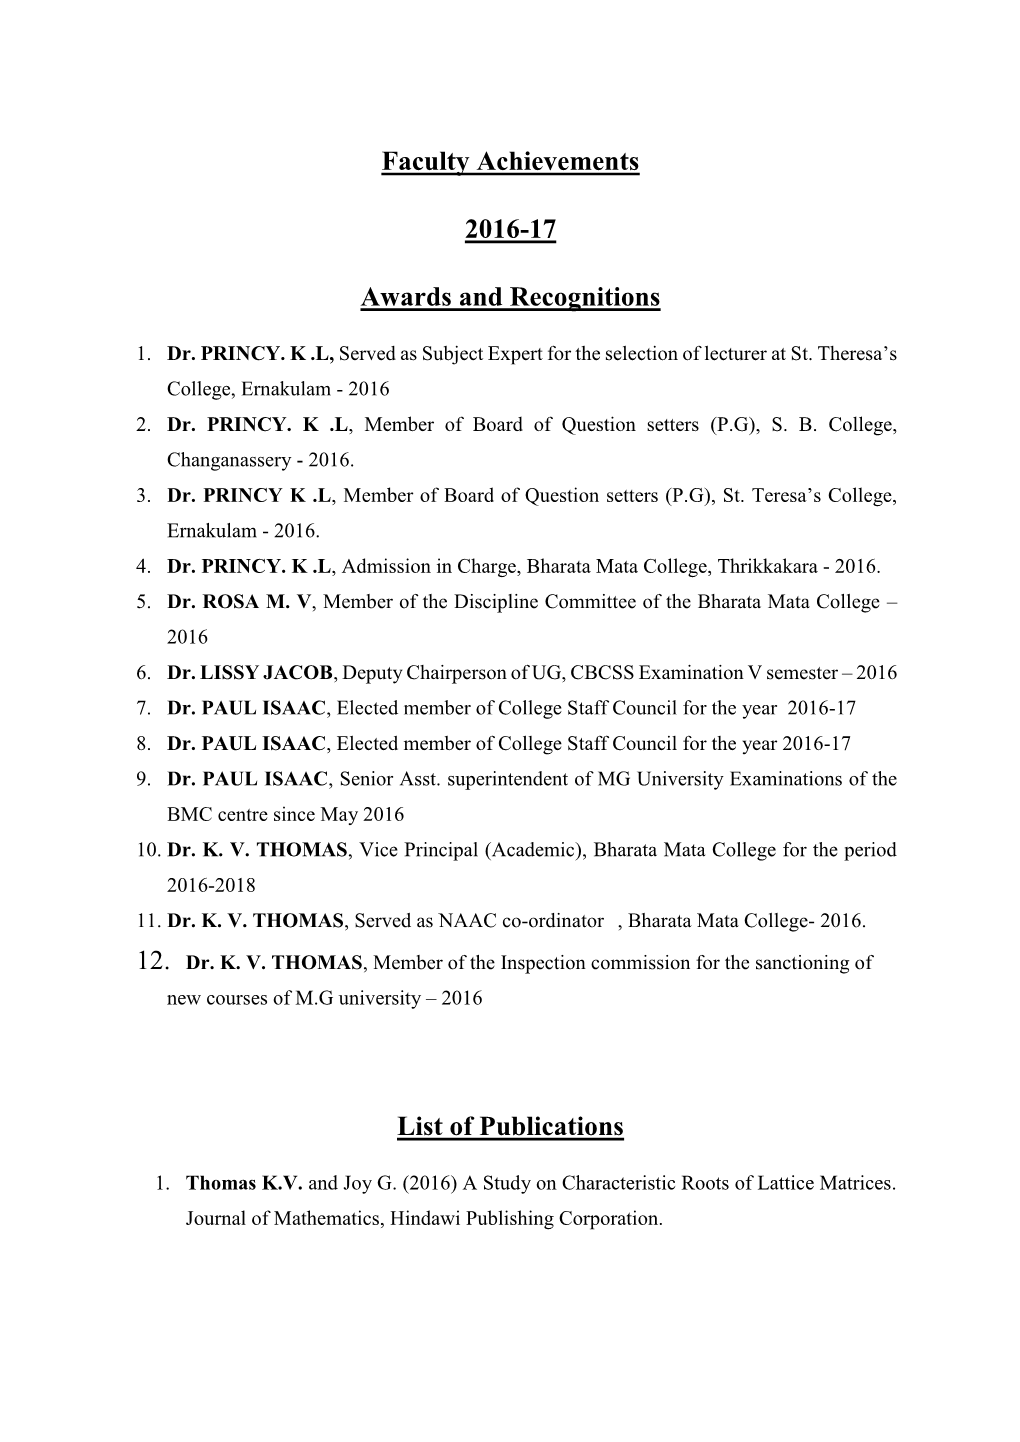 Faculty Achievements 2016-17 Awards and Recognitions List of Publications